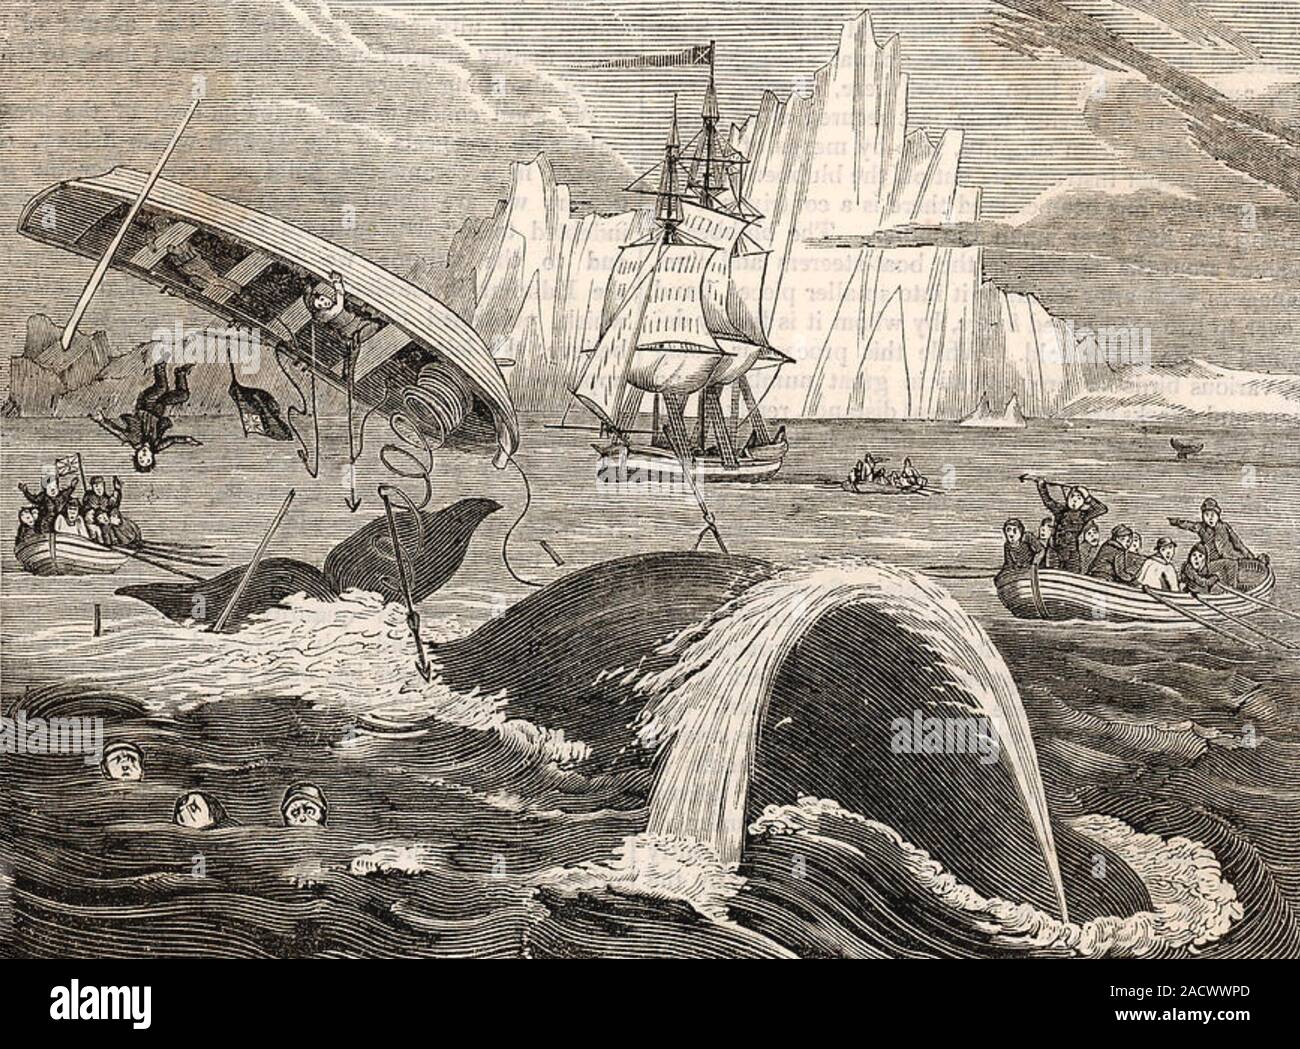 WHALING IN ARCTIC SEAS in the 1840s Stock Photo